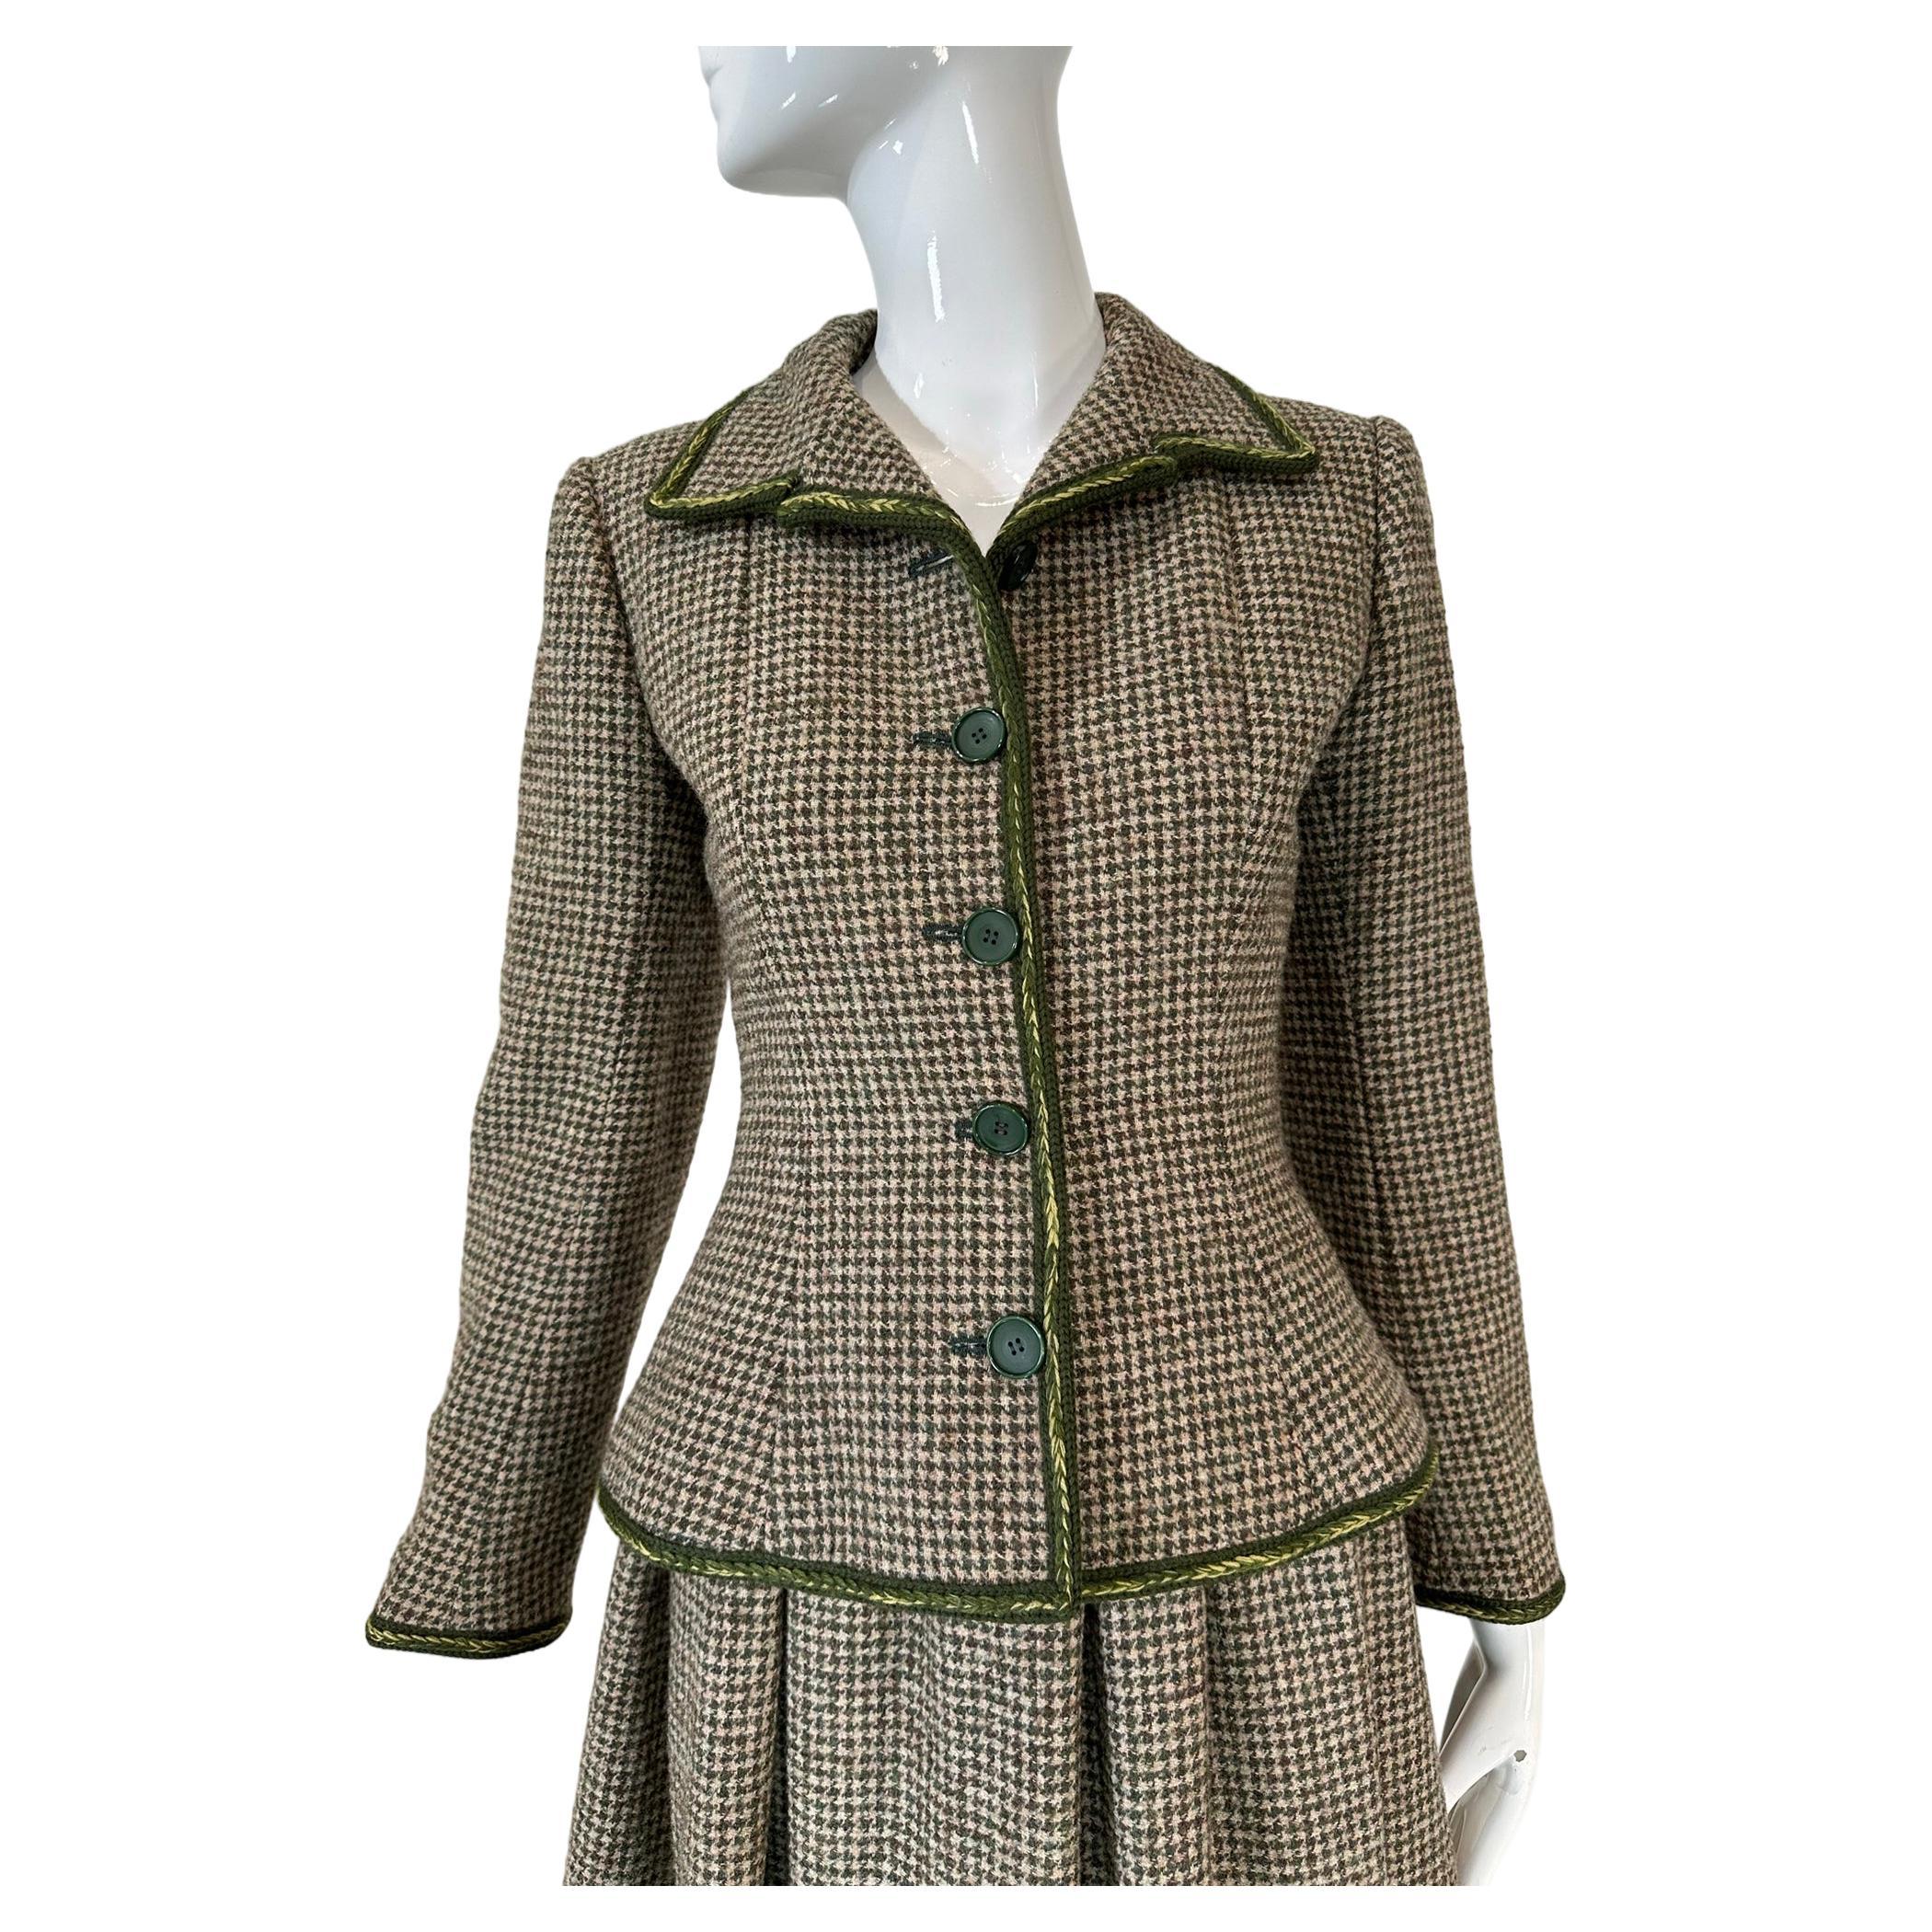 Valentino Boutique early 1960s wool tweed skirt suit, a nod to Christian Dior's Bar suit. Done in a moss green & cream dog tooth check, the jacket & skirt are trimmed in coordinating olive green & yellow wool braid trim. The long sleeve jacket